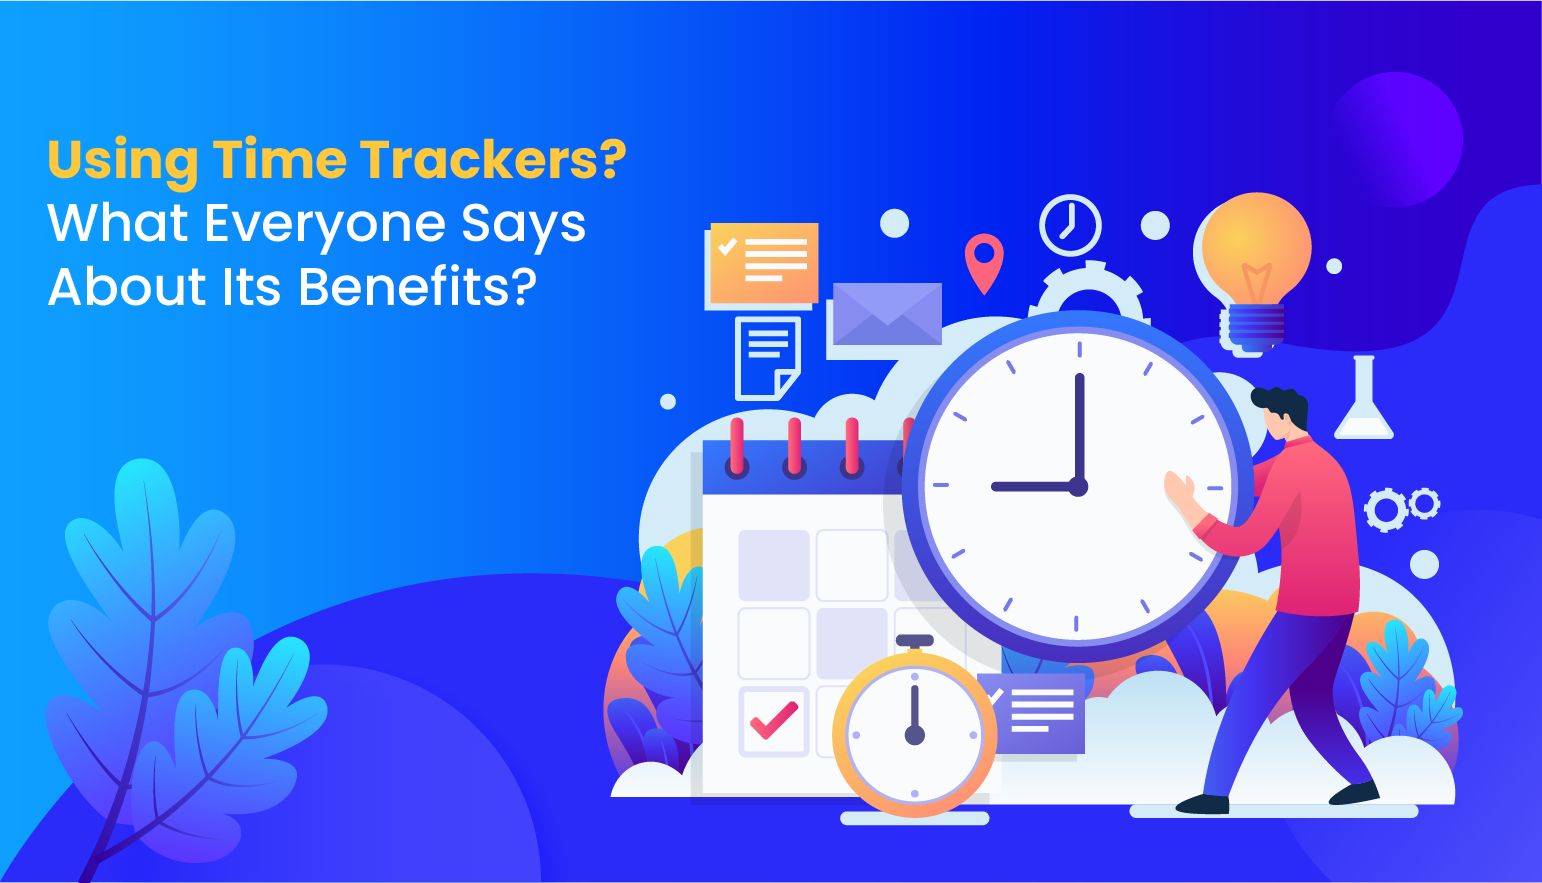  Time Tracking Software and What Everyone Says About its Benefits